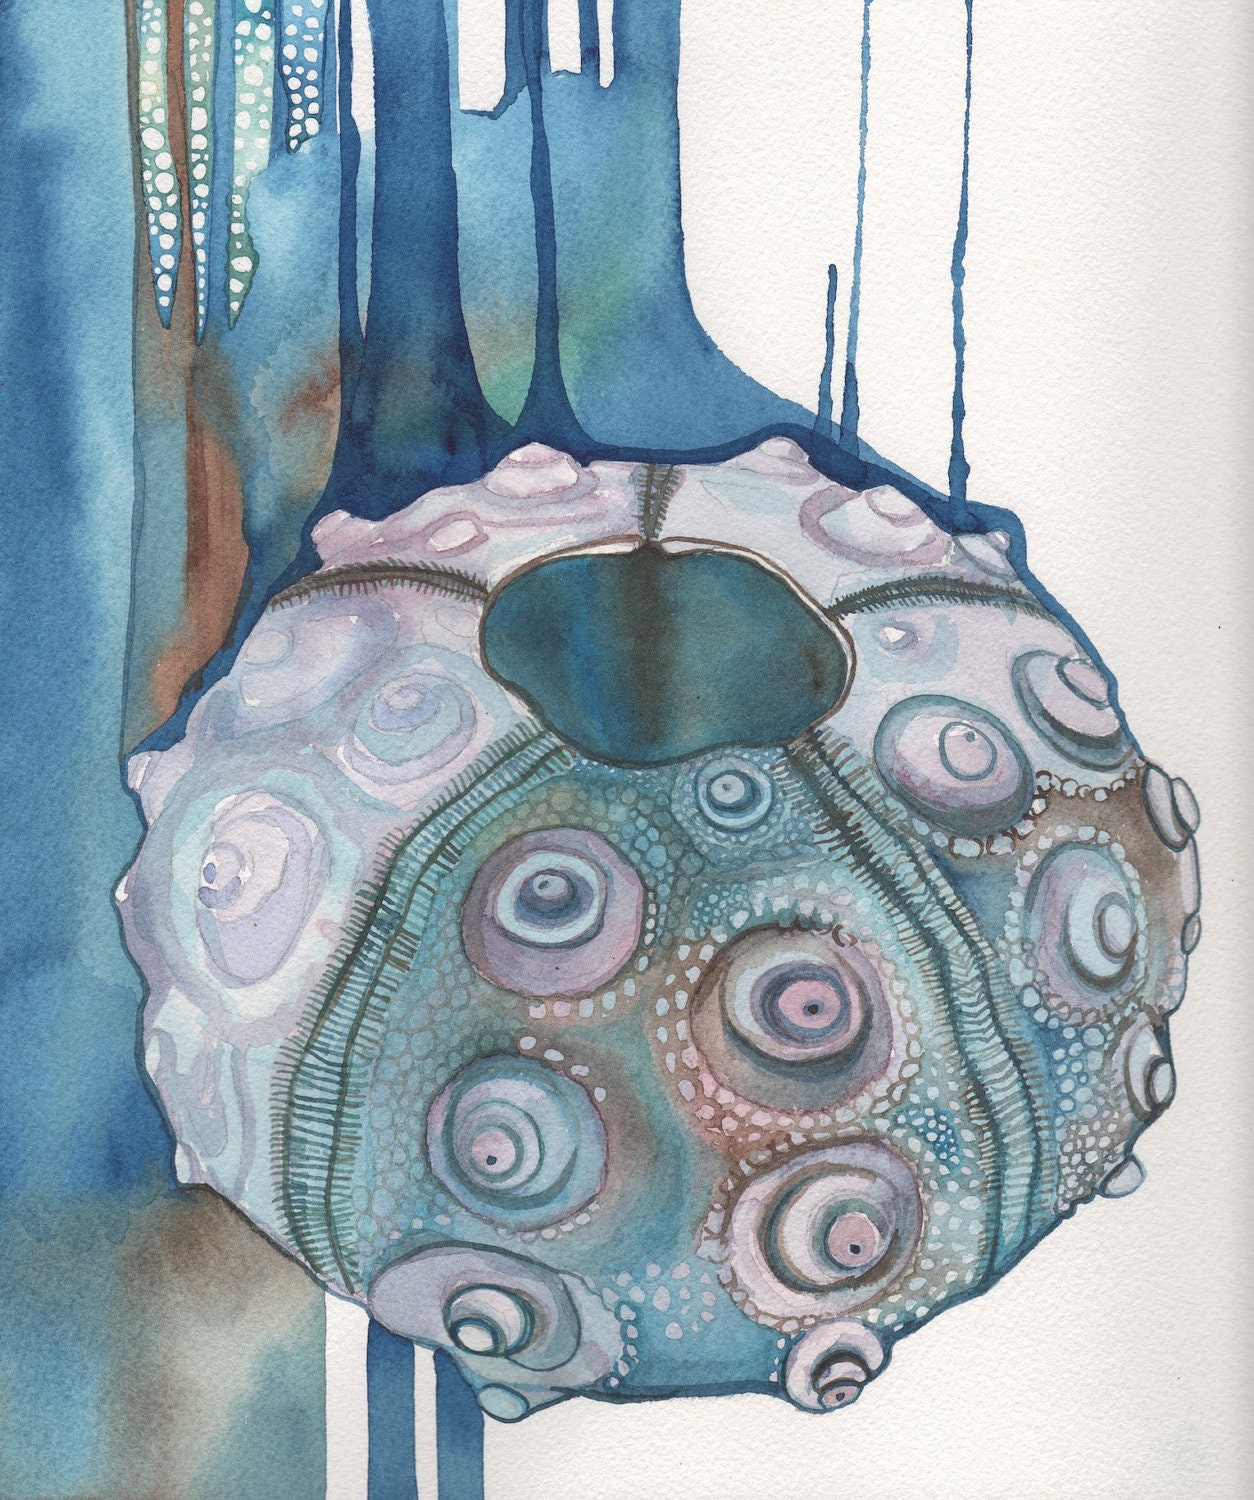 Watercolour Sputnik Sea Urchin shell 8.5 x 11 print of detailed artwork with whimsical surreal blue green brown aqua teal earth tones - DeepColouredWater